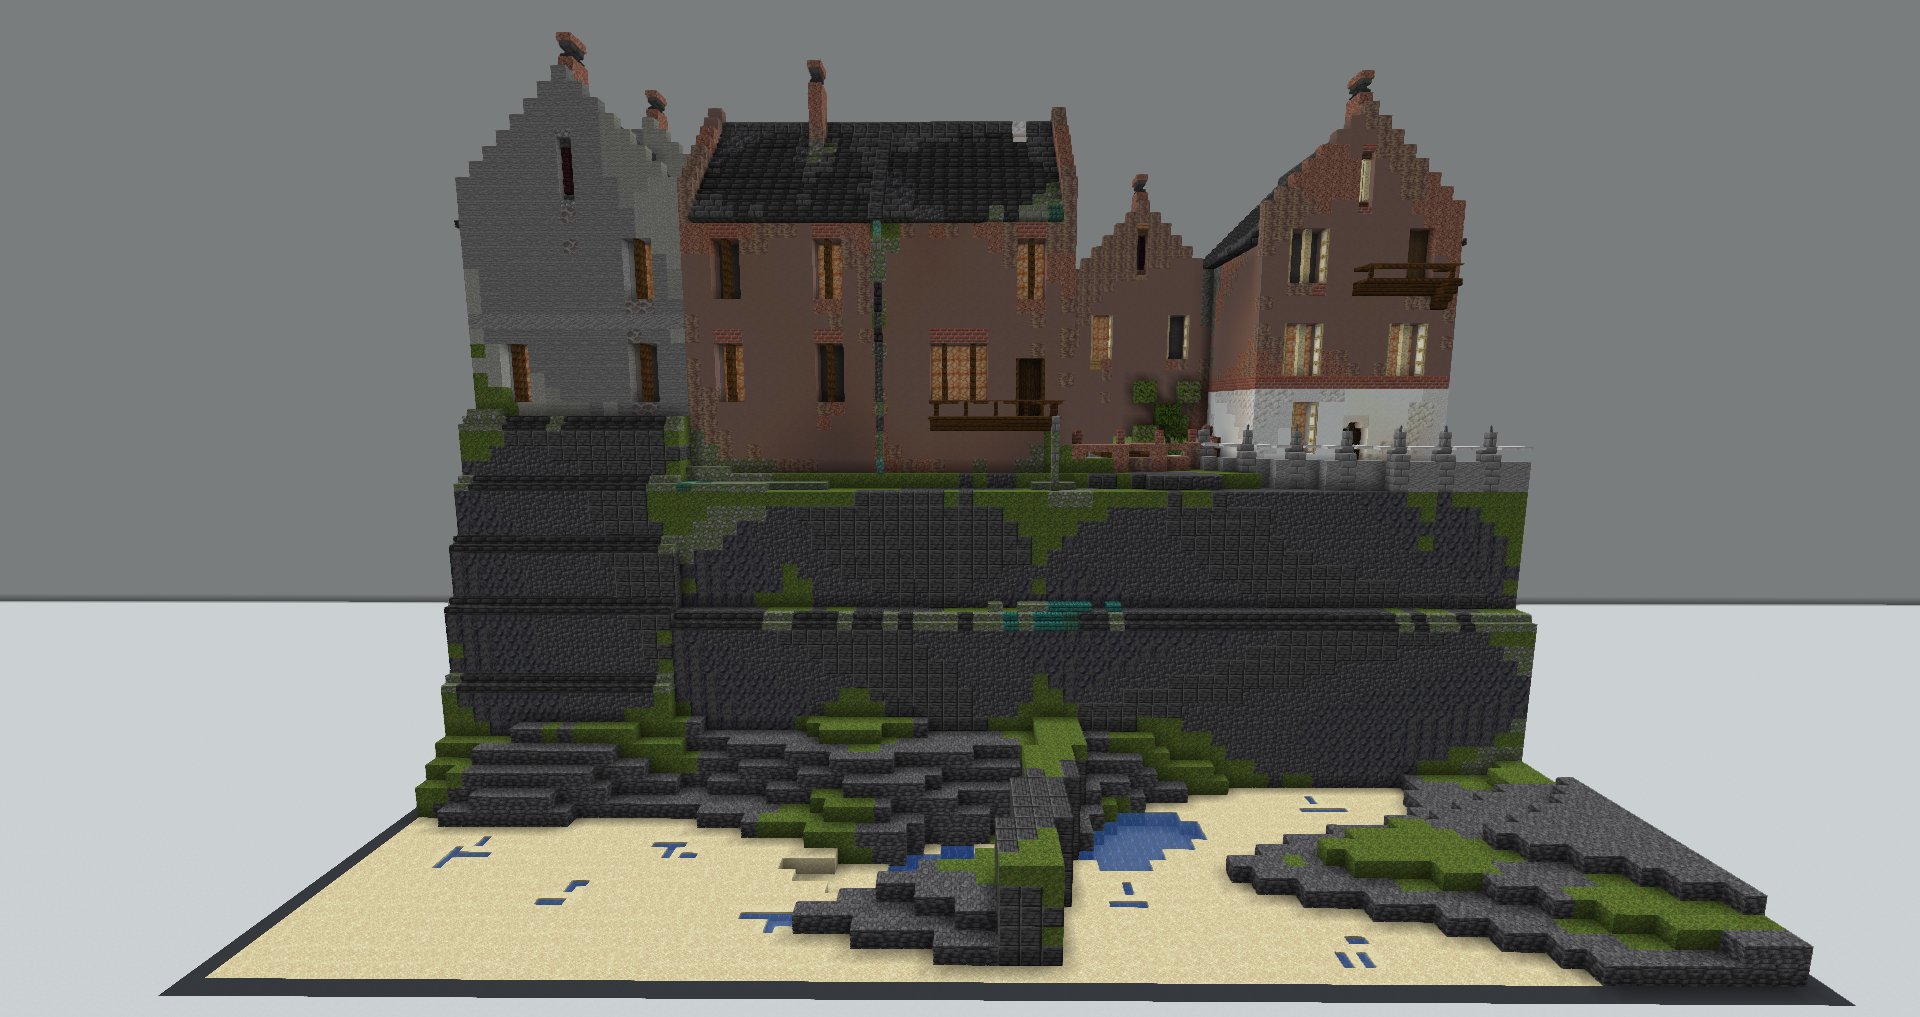 Place by the sea - Based off of some houses from Staithes, Yorkshire